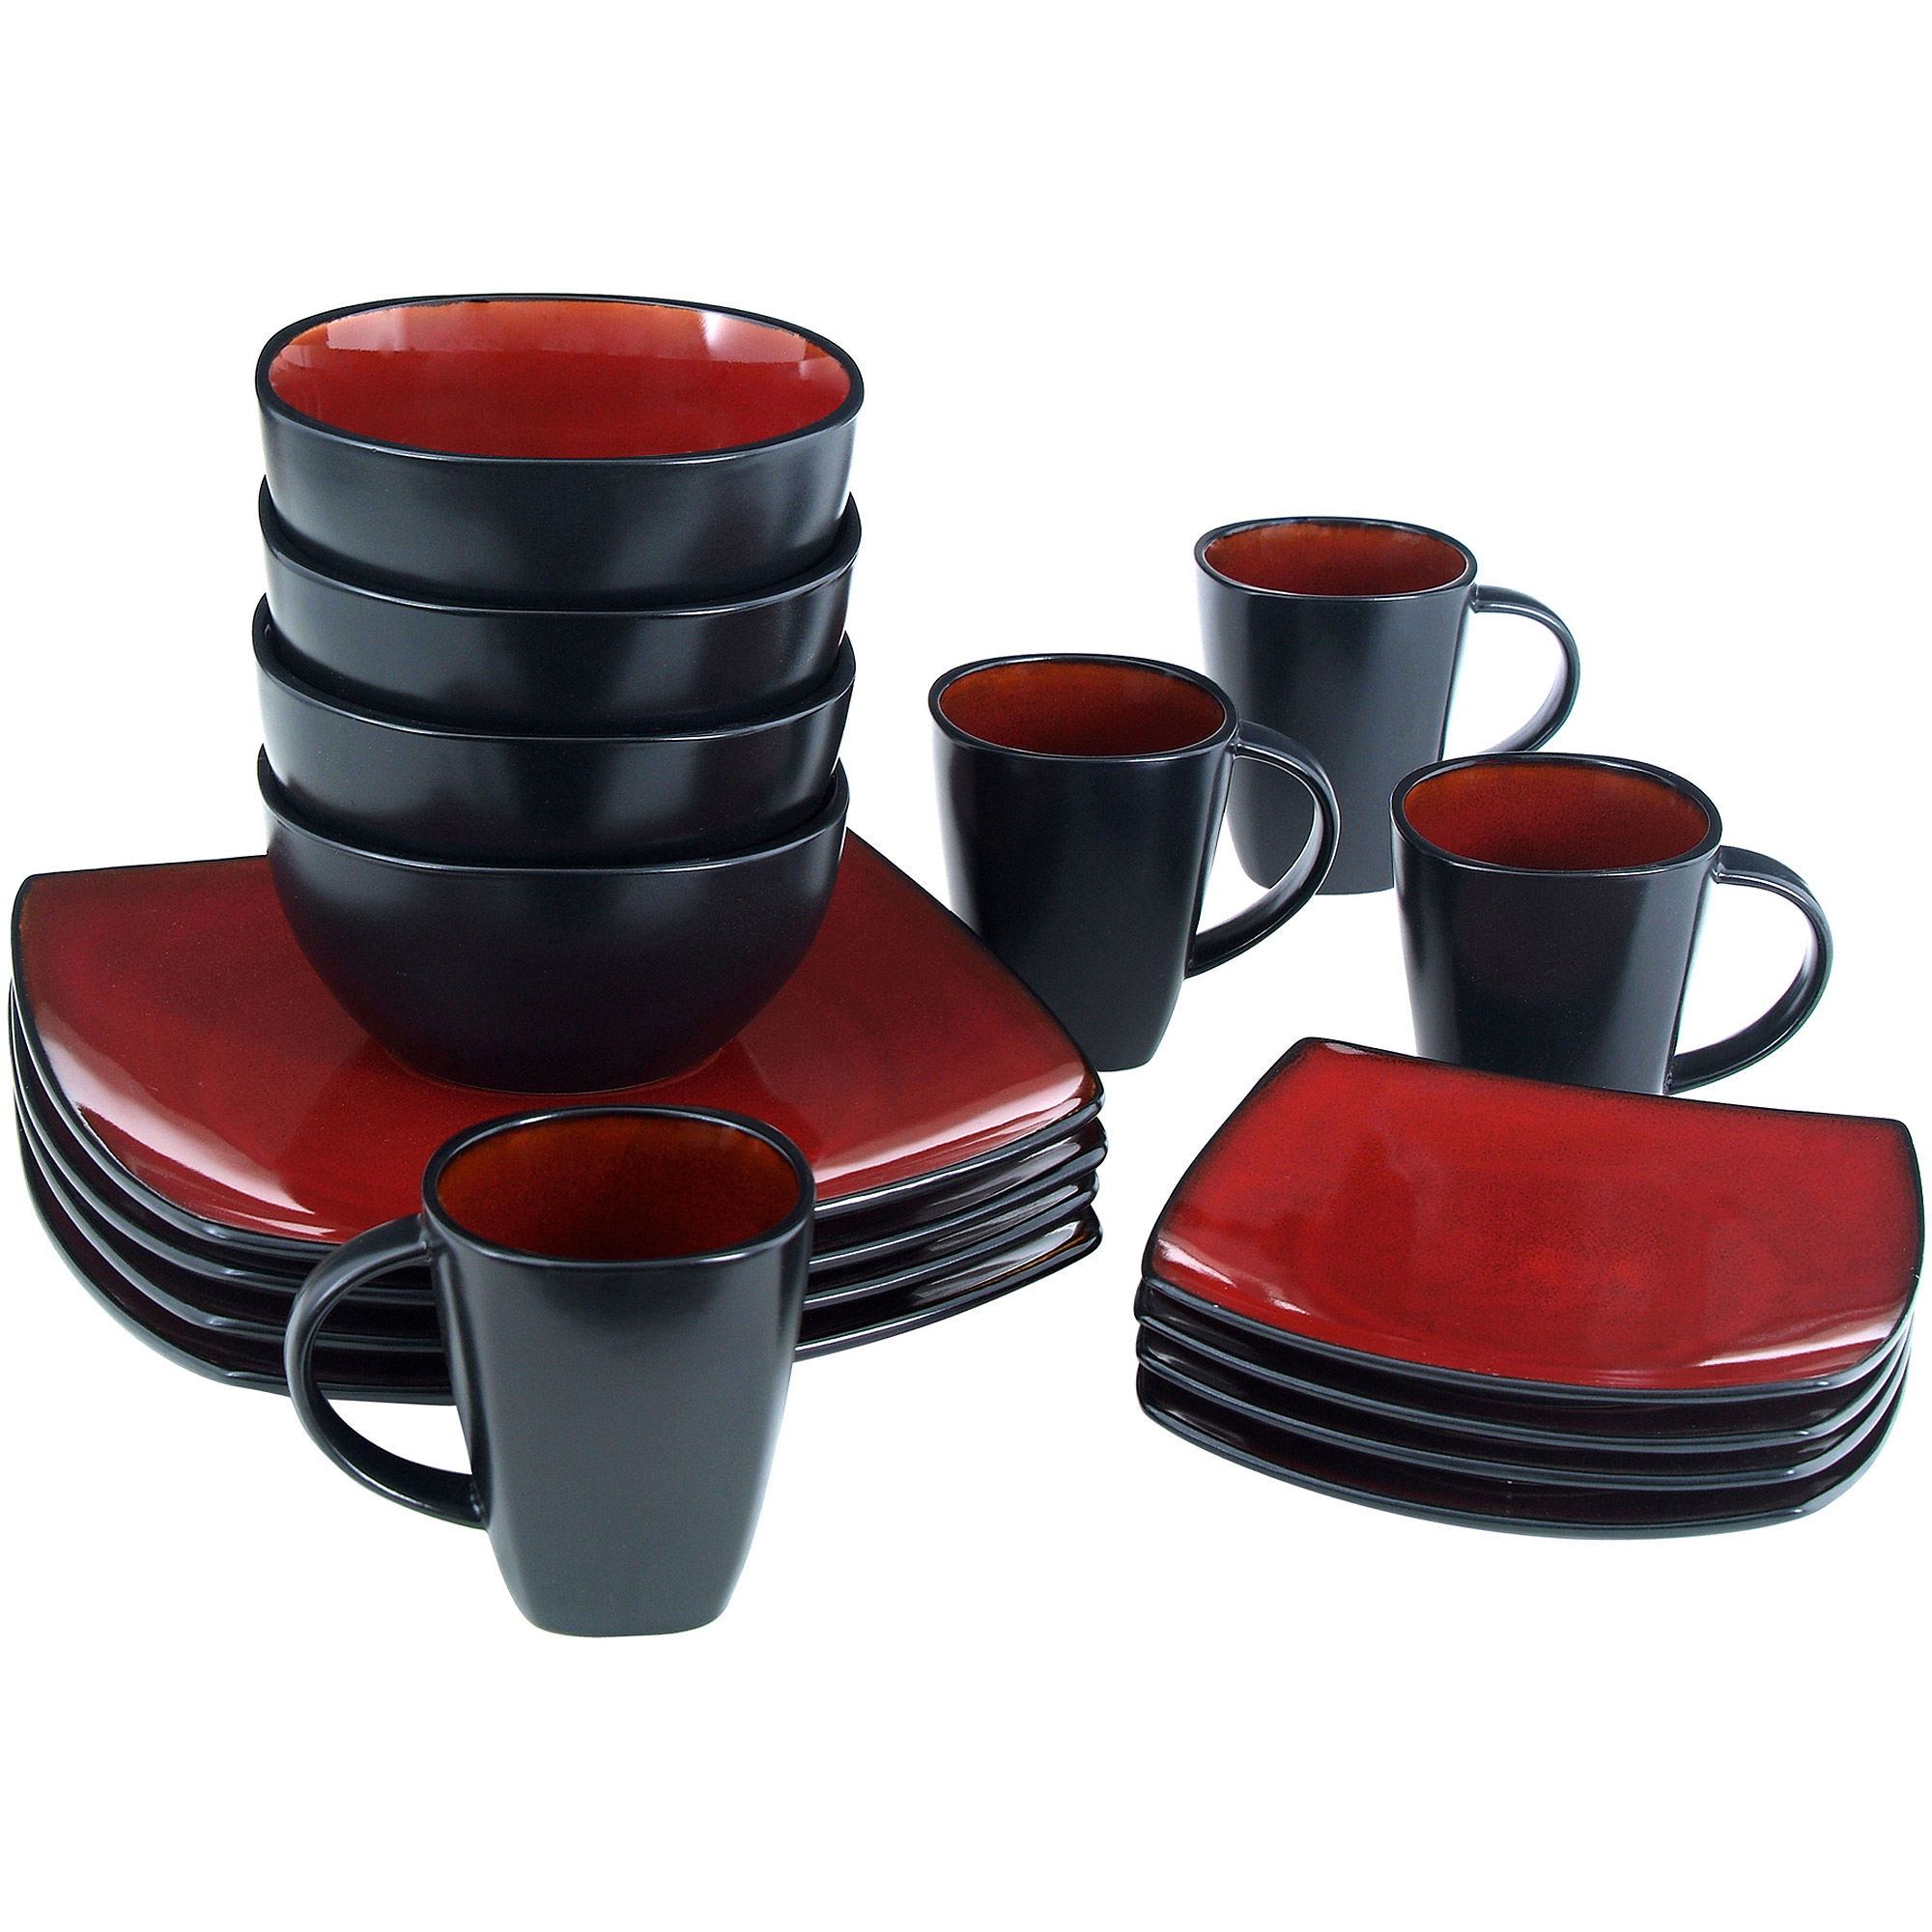 Better Homes & Gardens 16-Piece Dinnerware Set, Tuscan Red - image 1 of 6